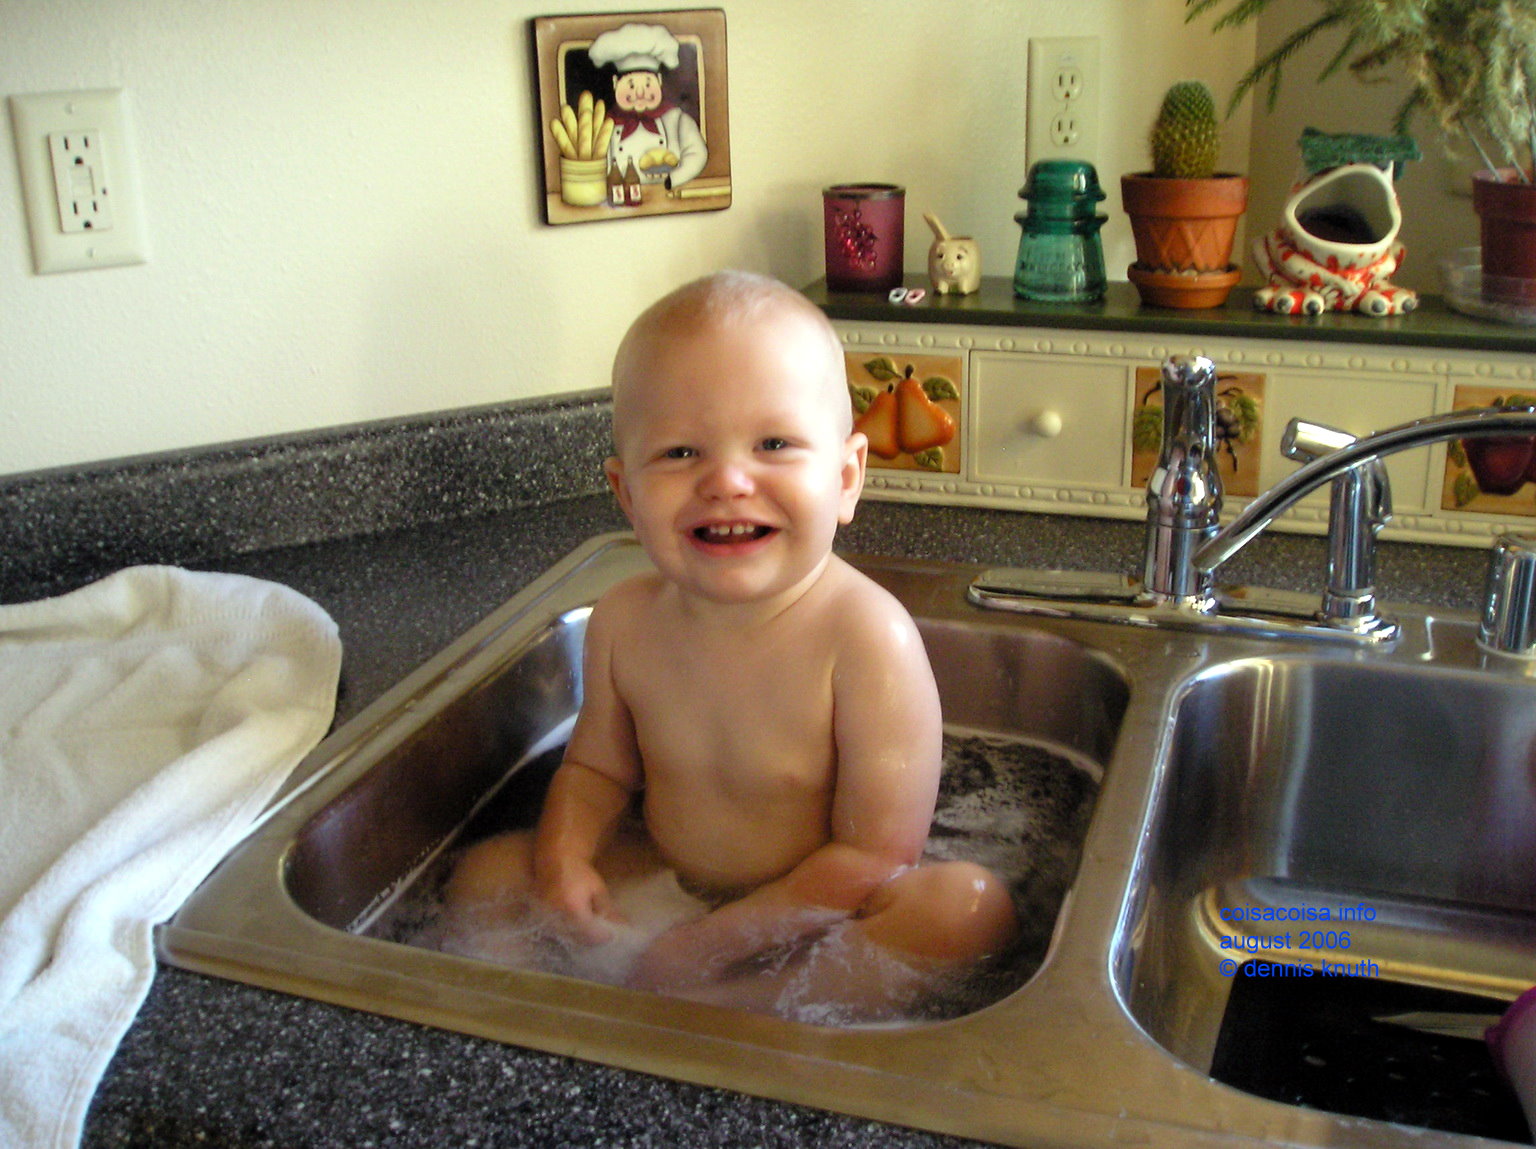 Jared taking a bath in the sink